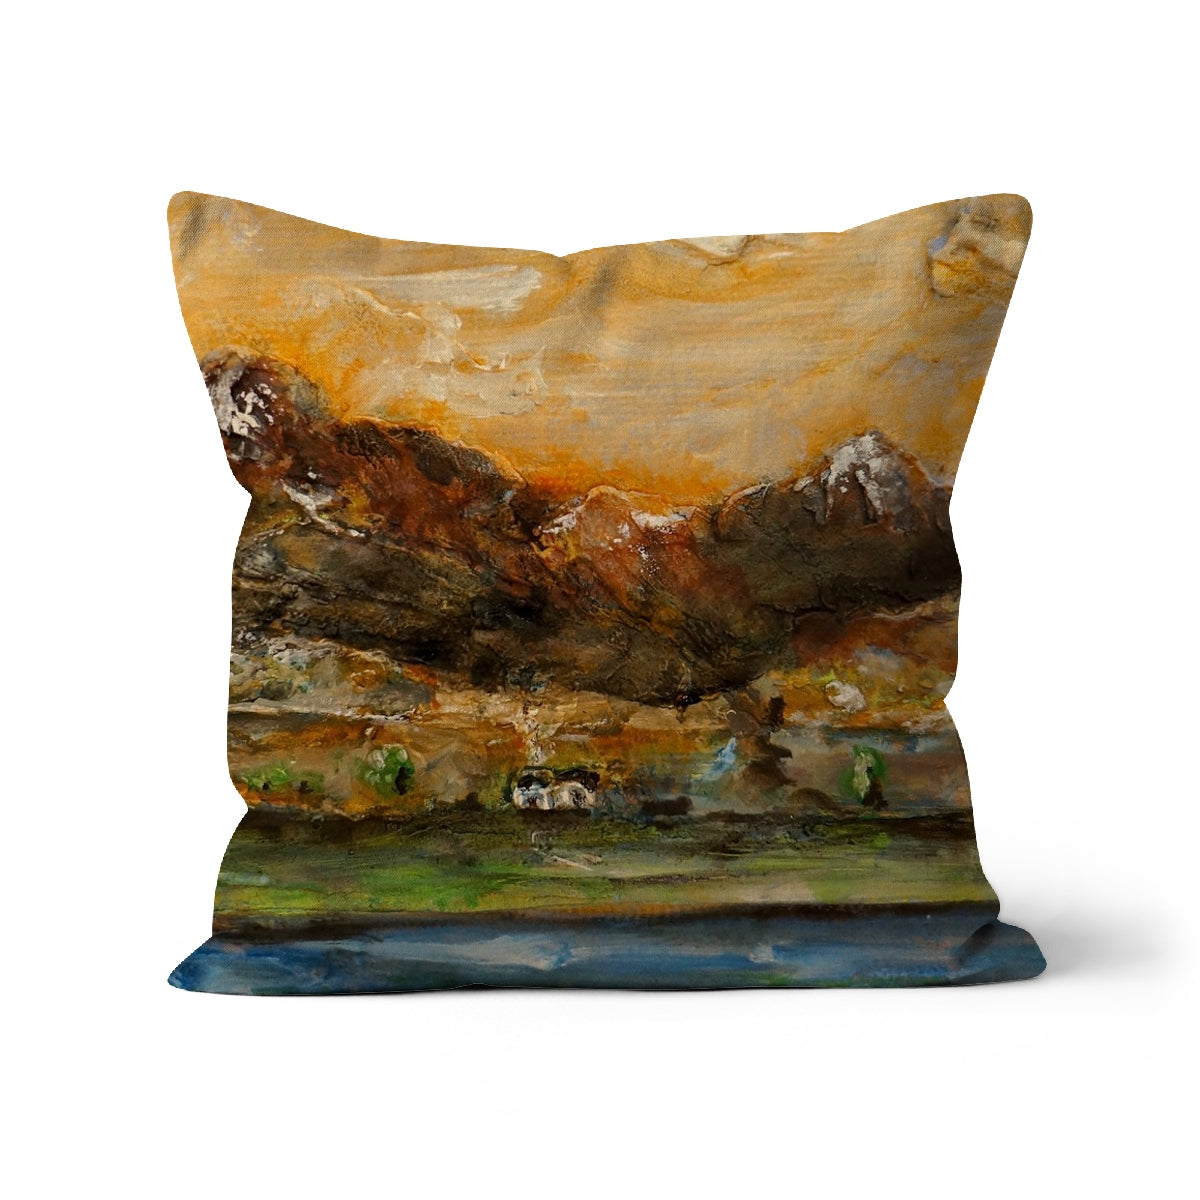 A Glencoe Cottage Art Gifts Cushion-Cushions-Glencoe Art Gallery-Linen-22"x22"-Paintings, Prints, Homeware, Art Gifts From Scotland By Scottish Artist Kevin Hunter